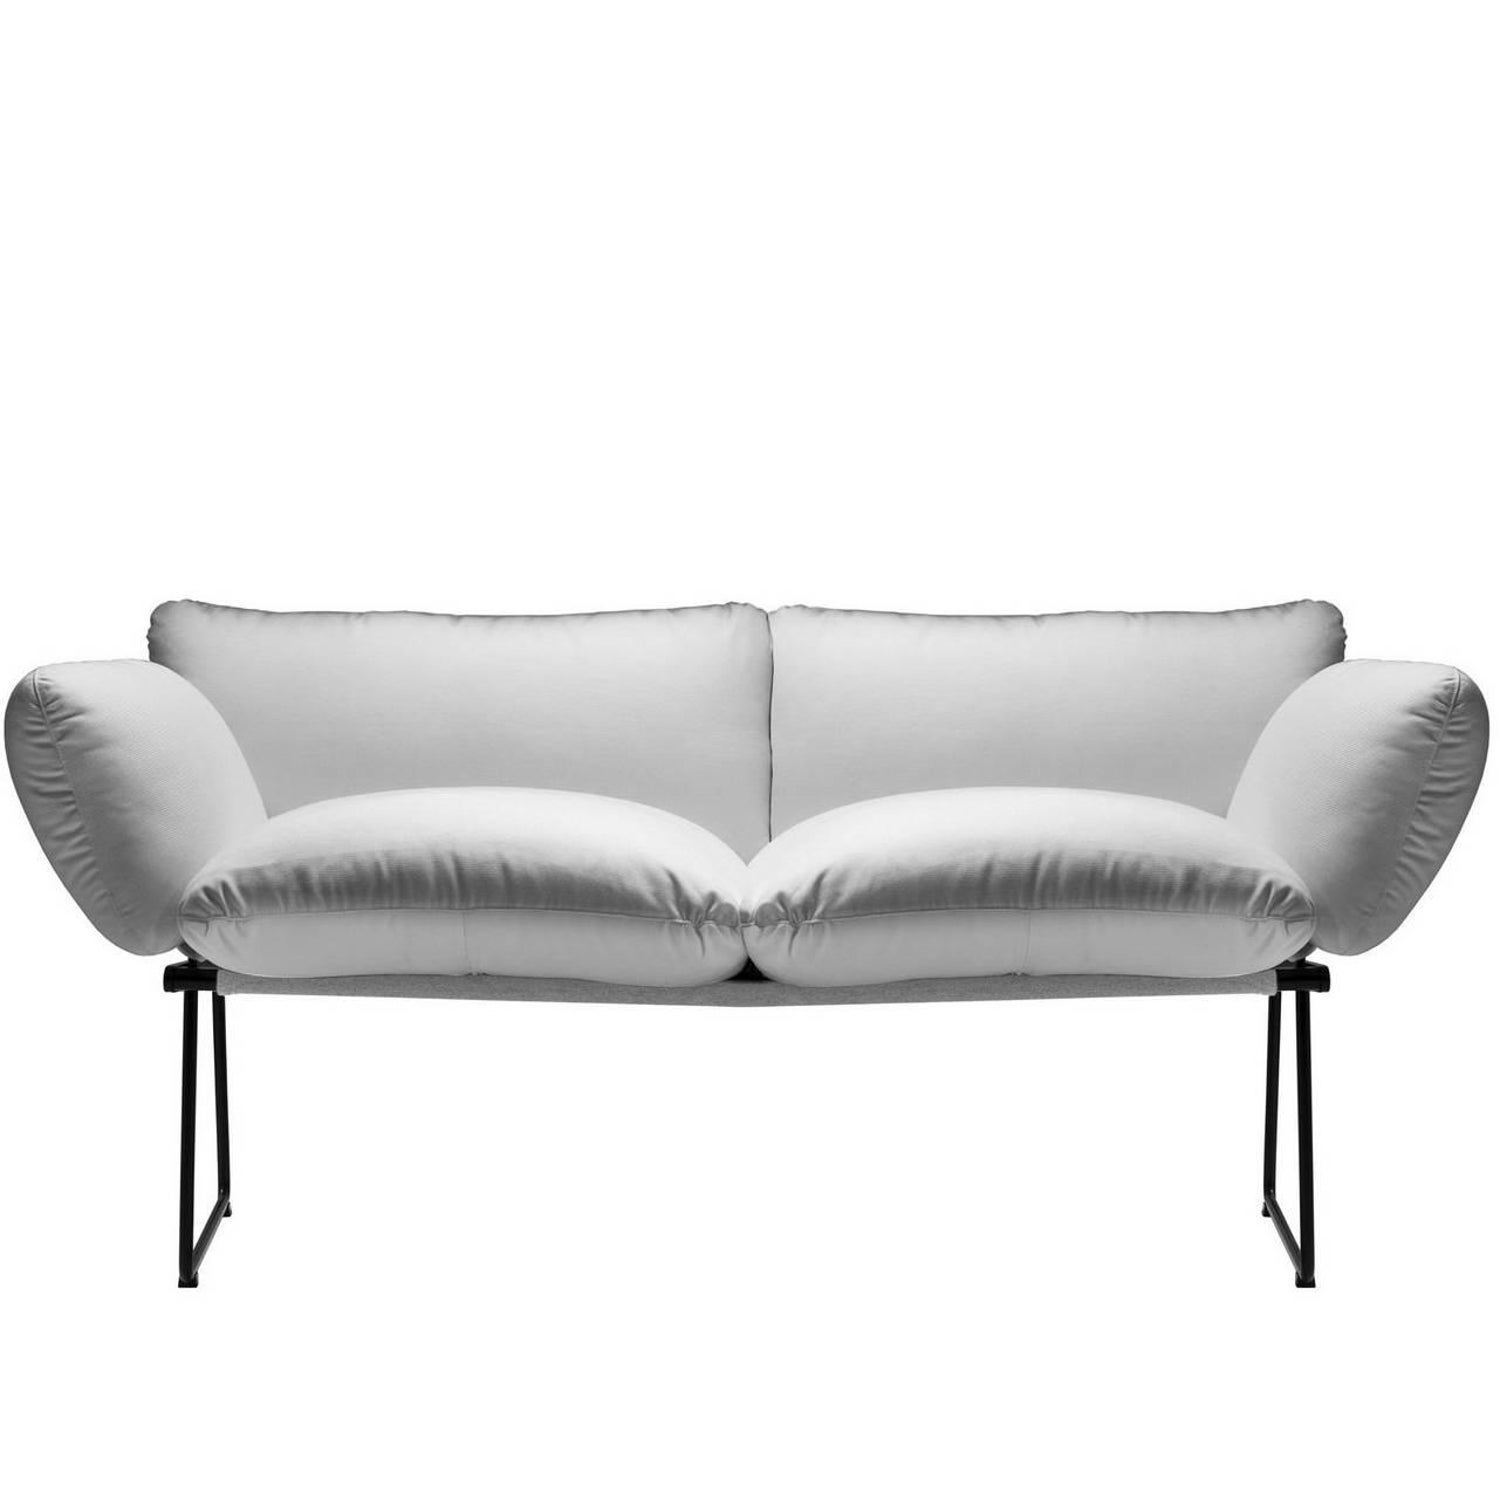 A Unique Sofa by Patricia Urquiola to Mark Her 20th Anniversary Working  with Moroso